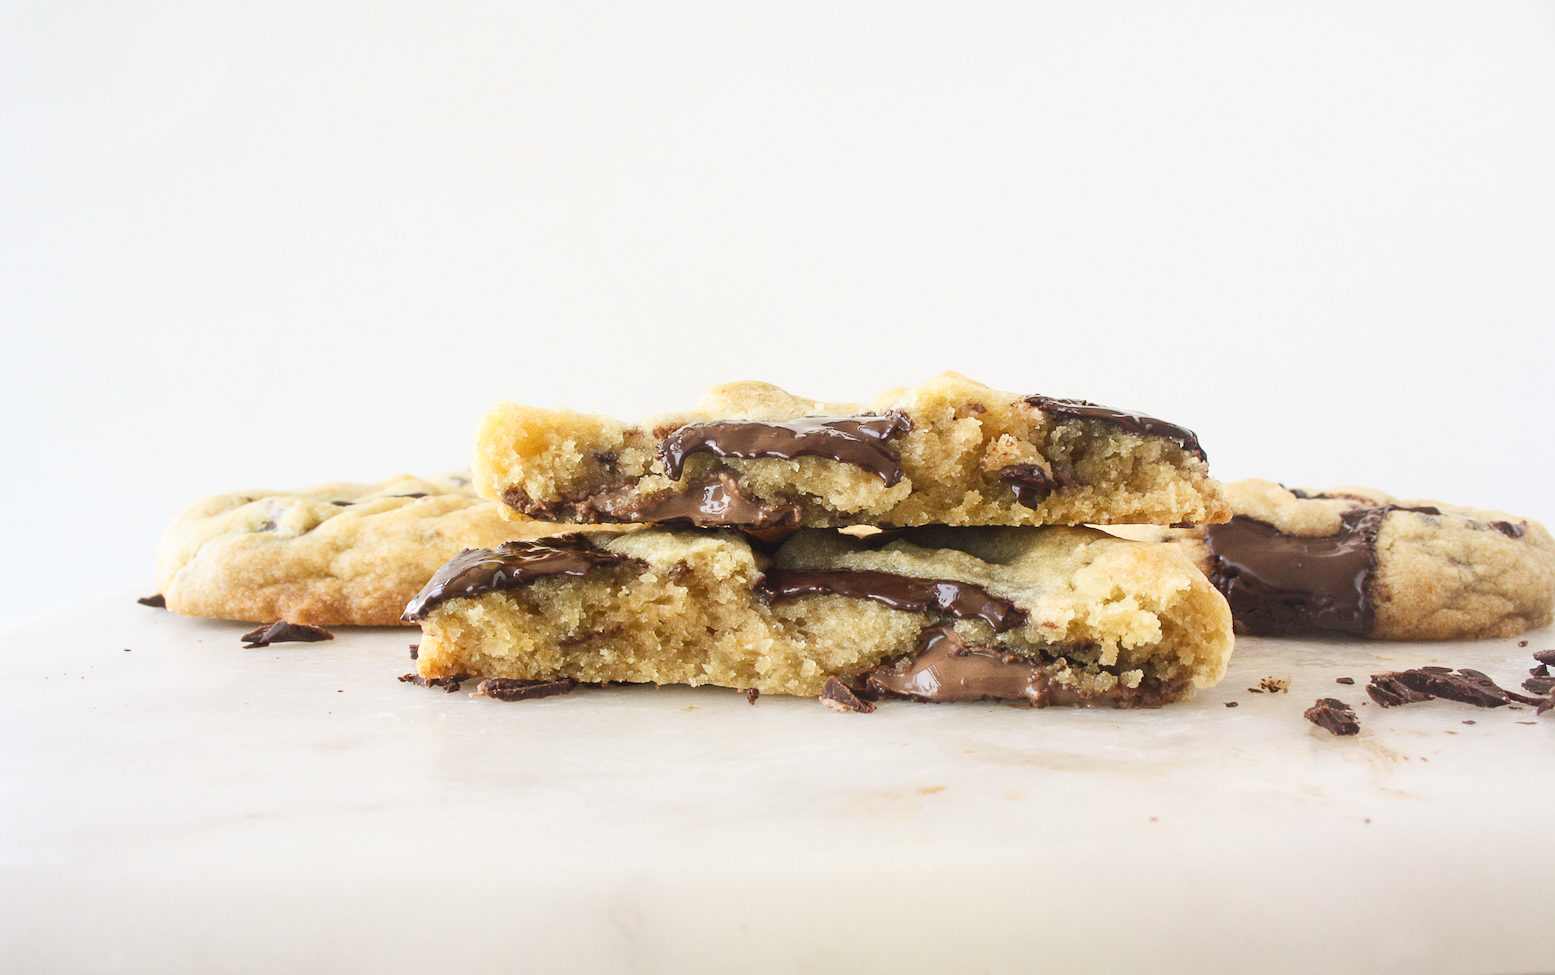 Crispy-edged, chewy-centered cookies filled with melty chocolate and orange zest!